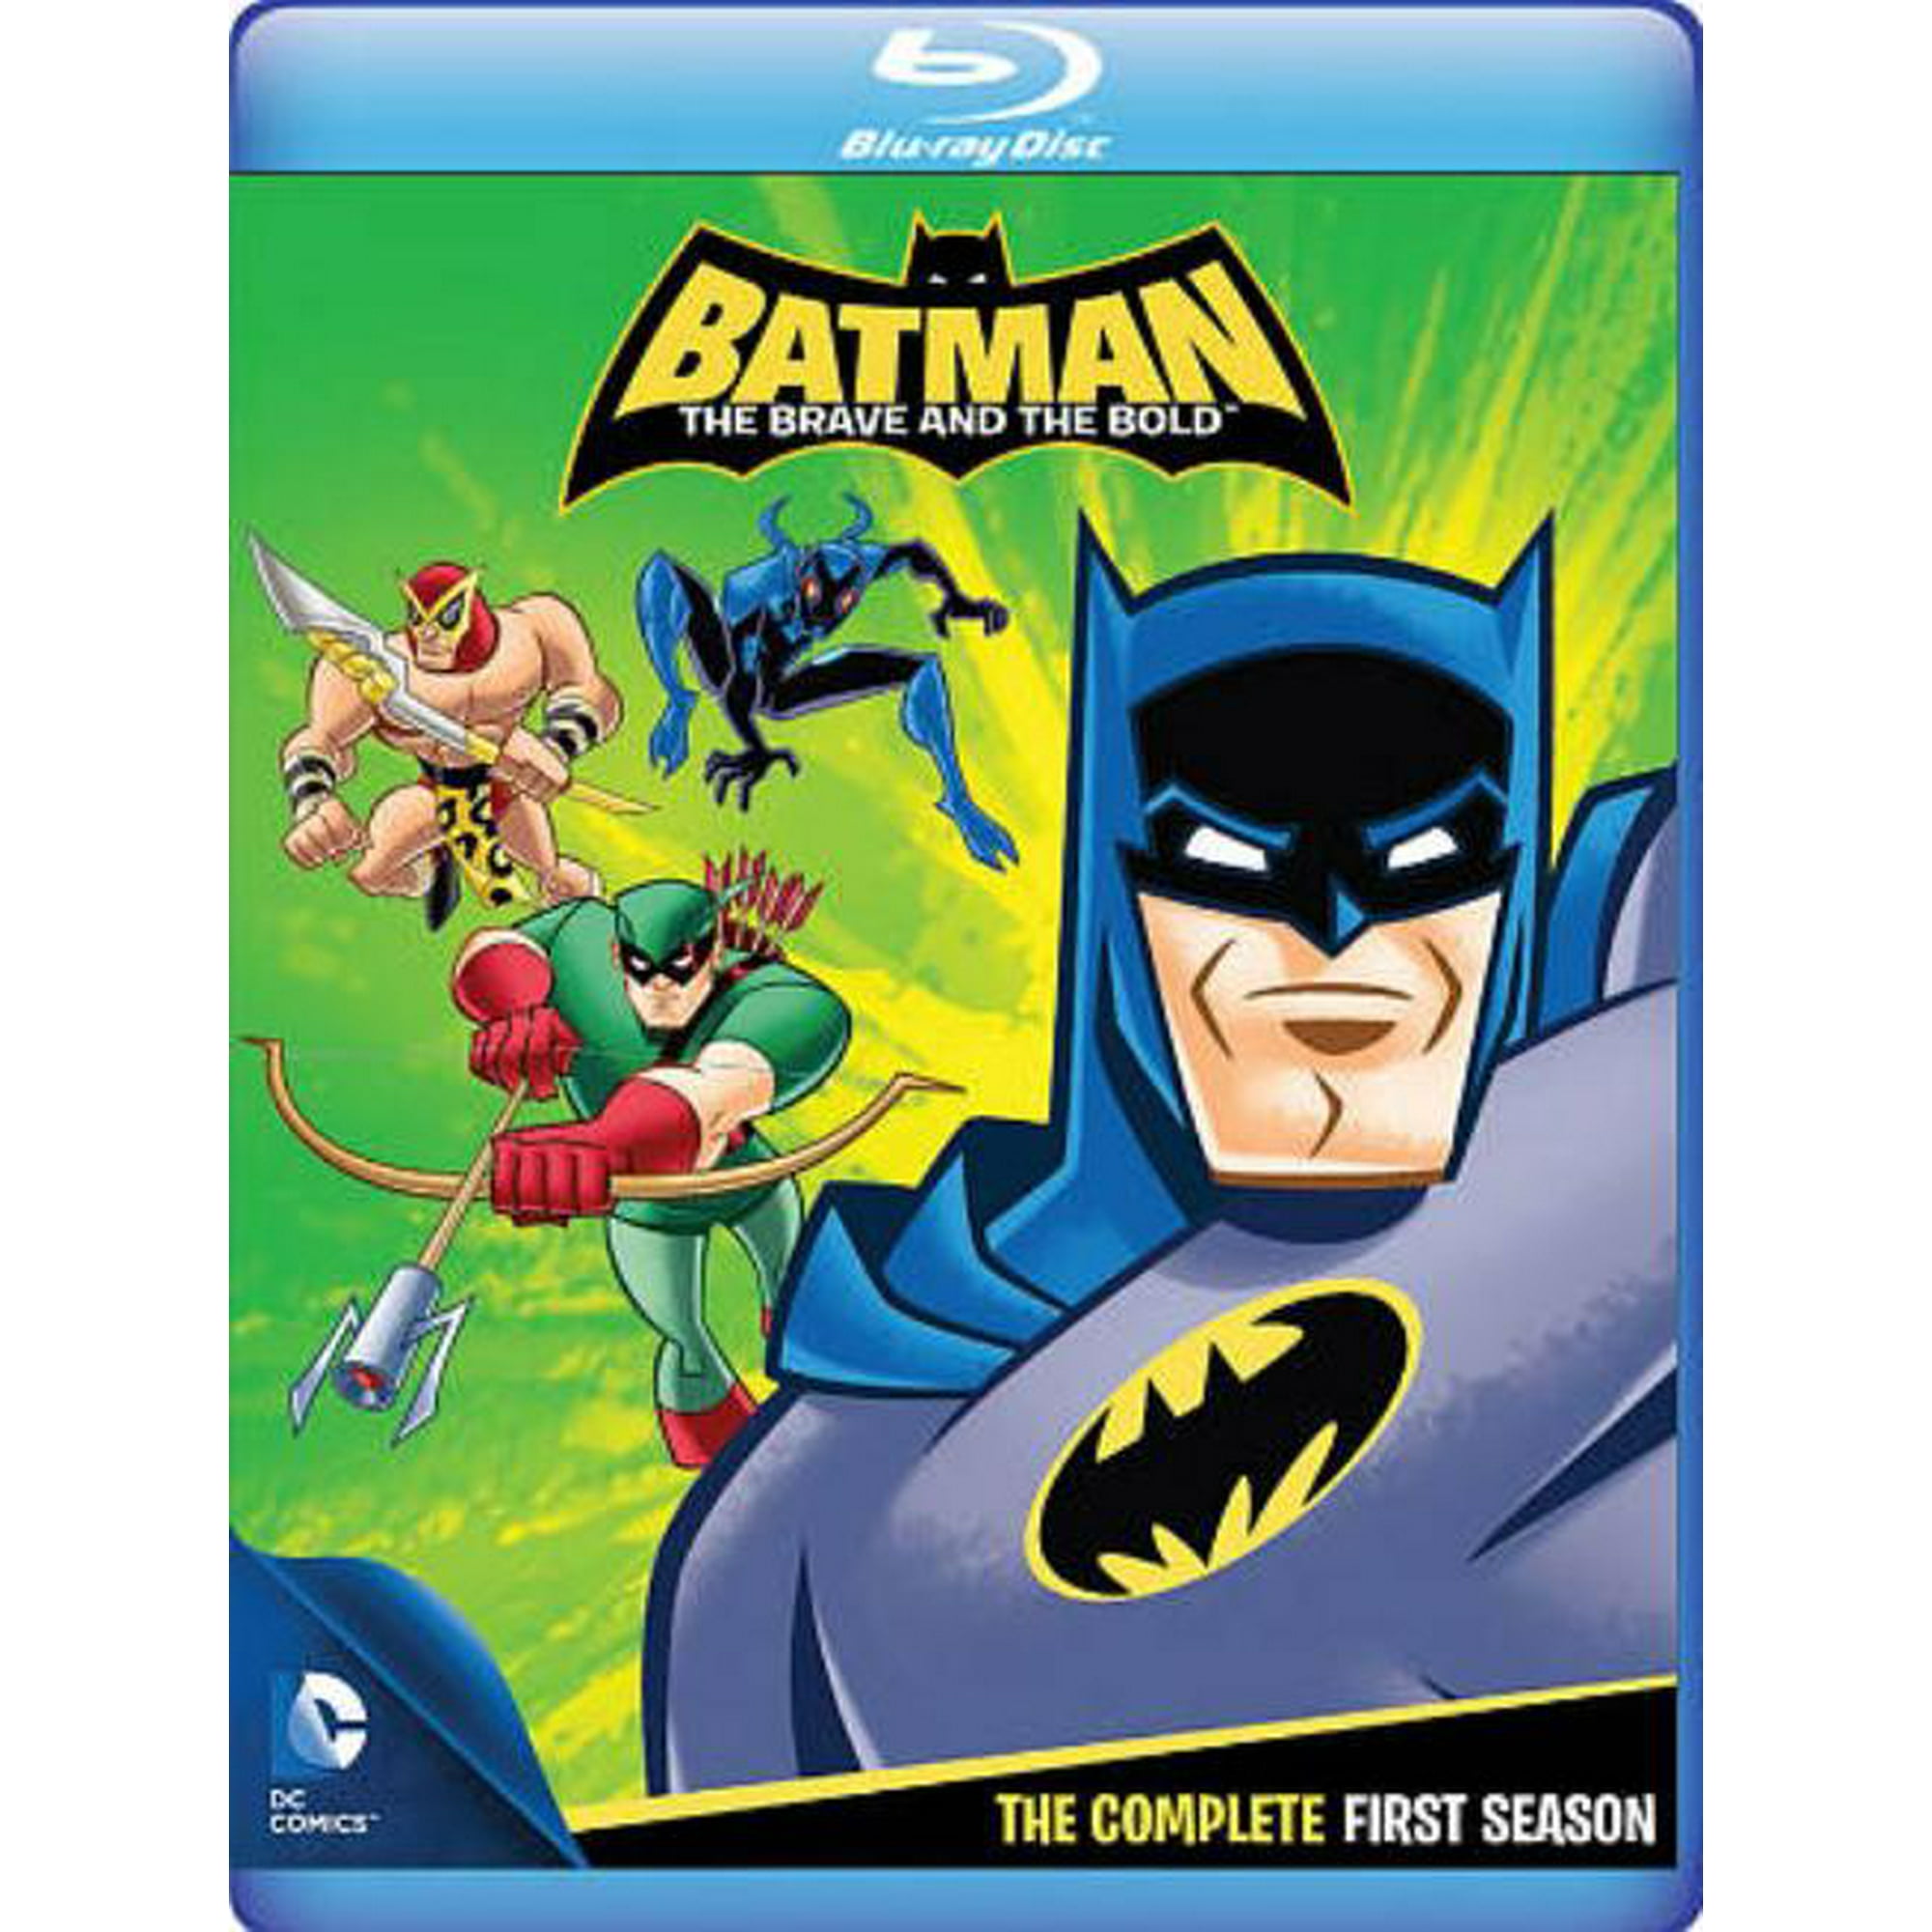 Batman: The Brave and the Bold - The Complete First Season Blu-ray Disc |  Walmart Canada